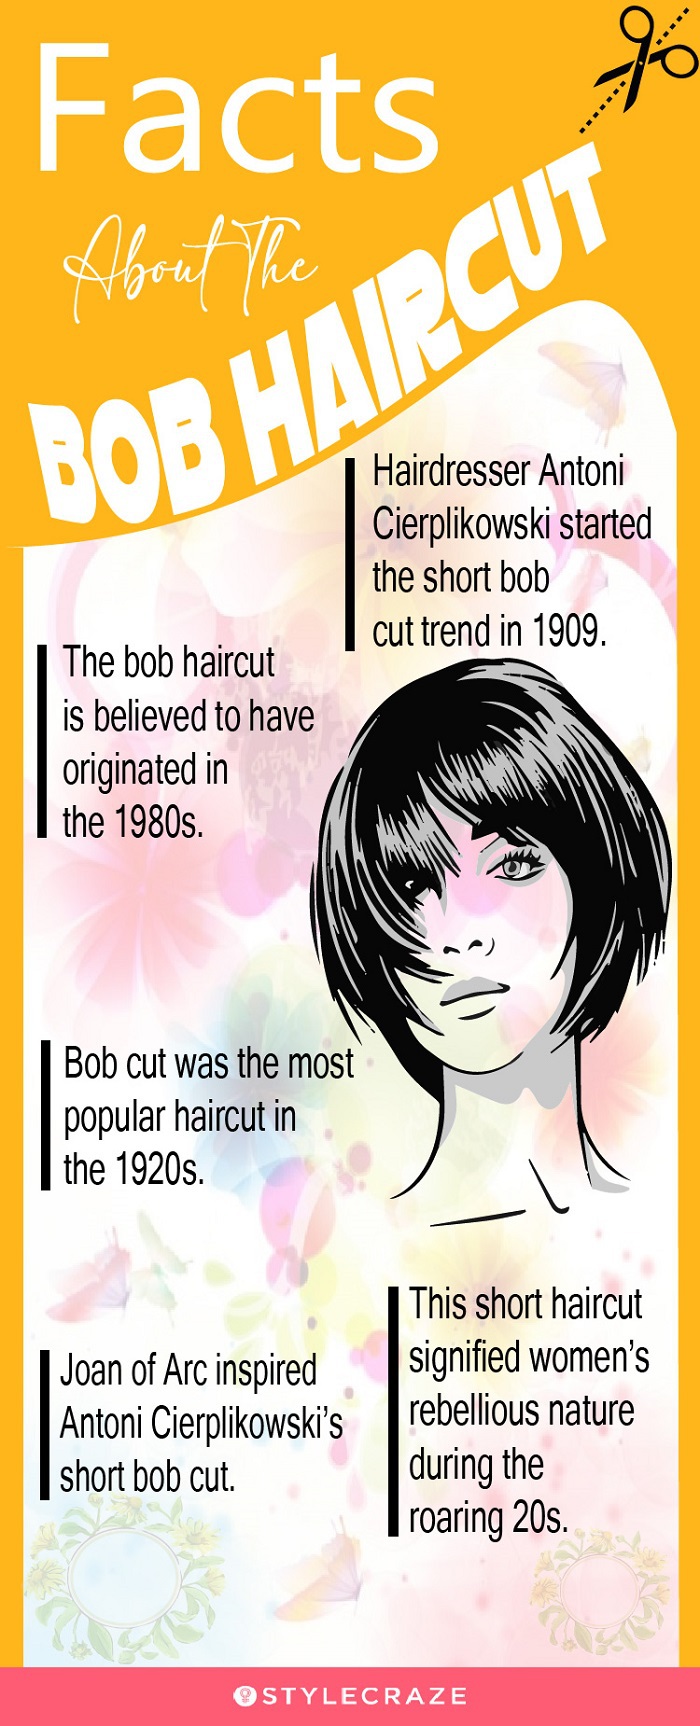 amazing facts about the bob haircut [infographic]